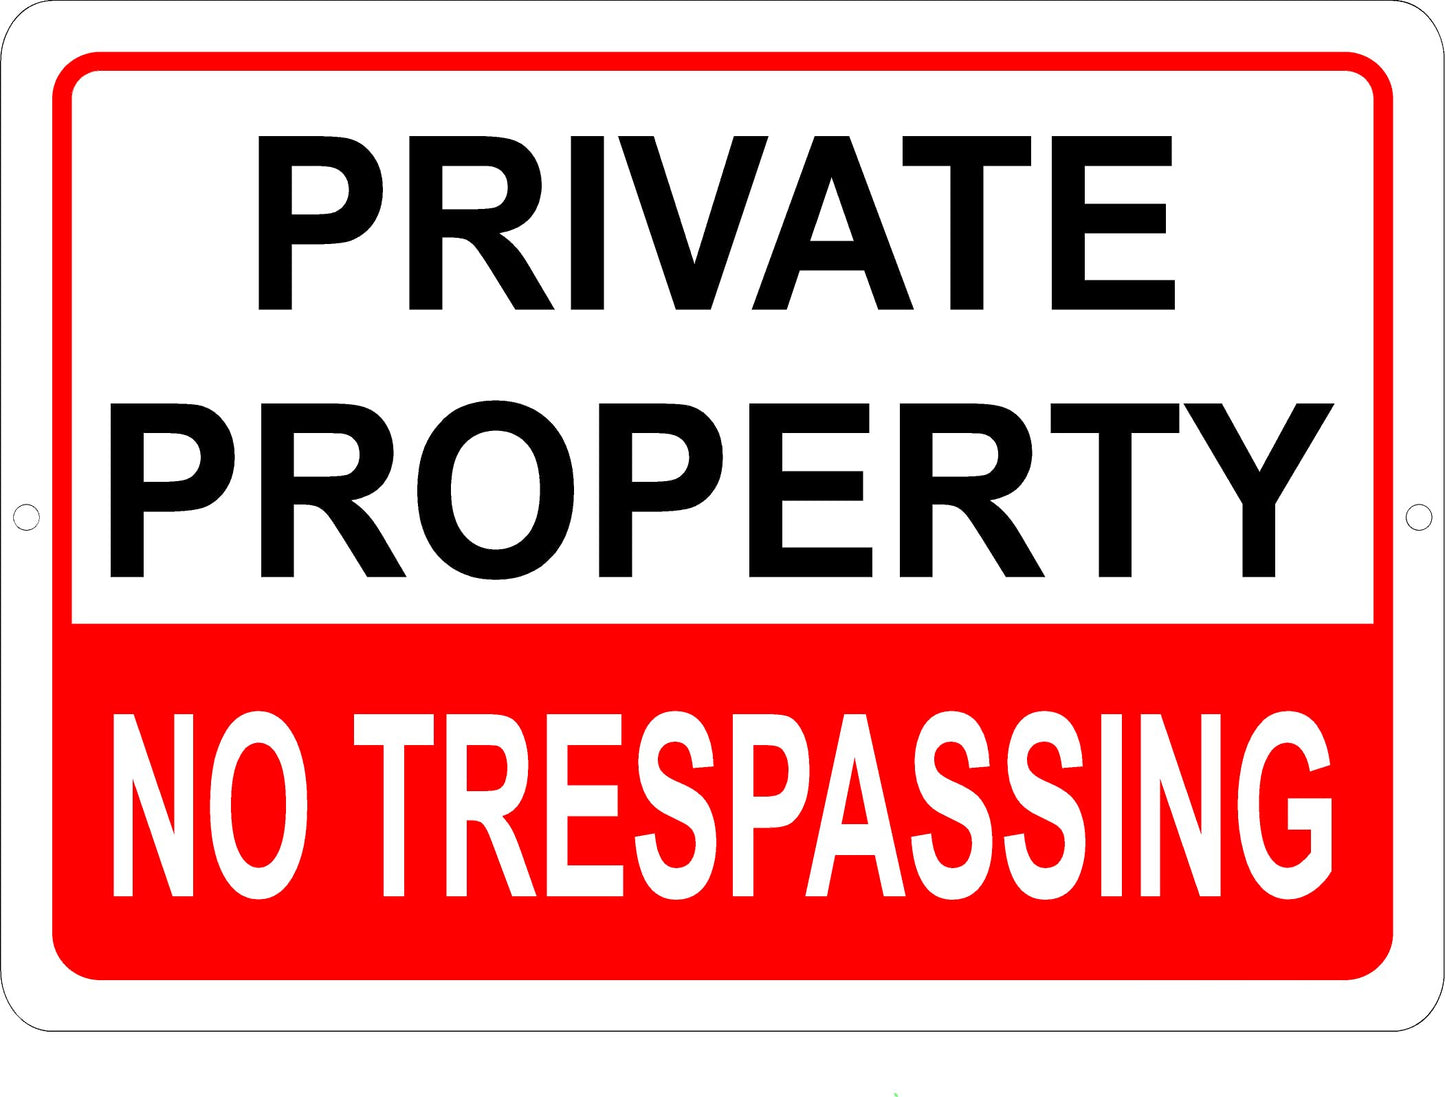 Premium UV Printed Aluminum Rust-Proof Metal No Trespassing Signs For Private Property, Keep Out Sign with Posted Signs Fade Resistant Last For Years Made in USA. by AV Grafx (No Trespassing)